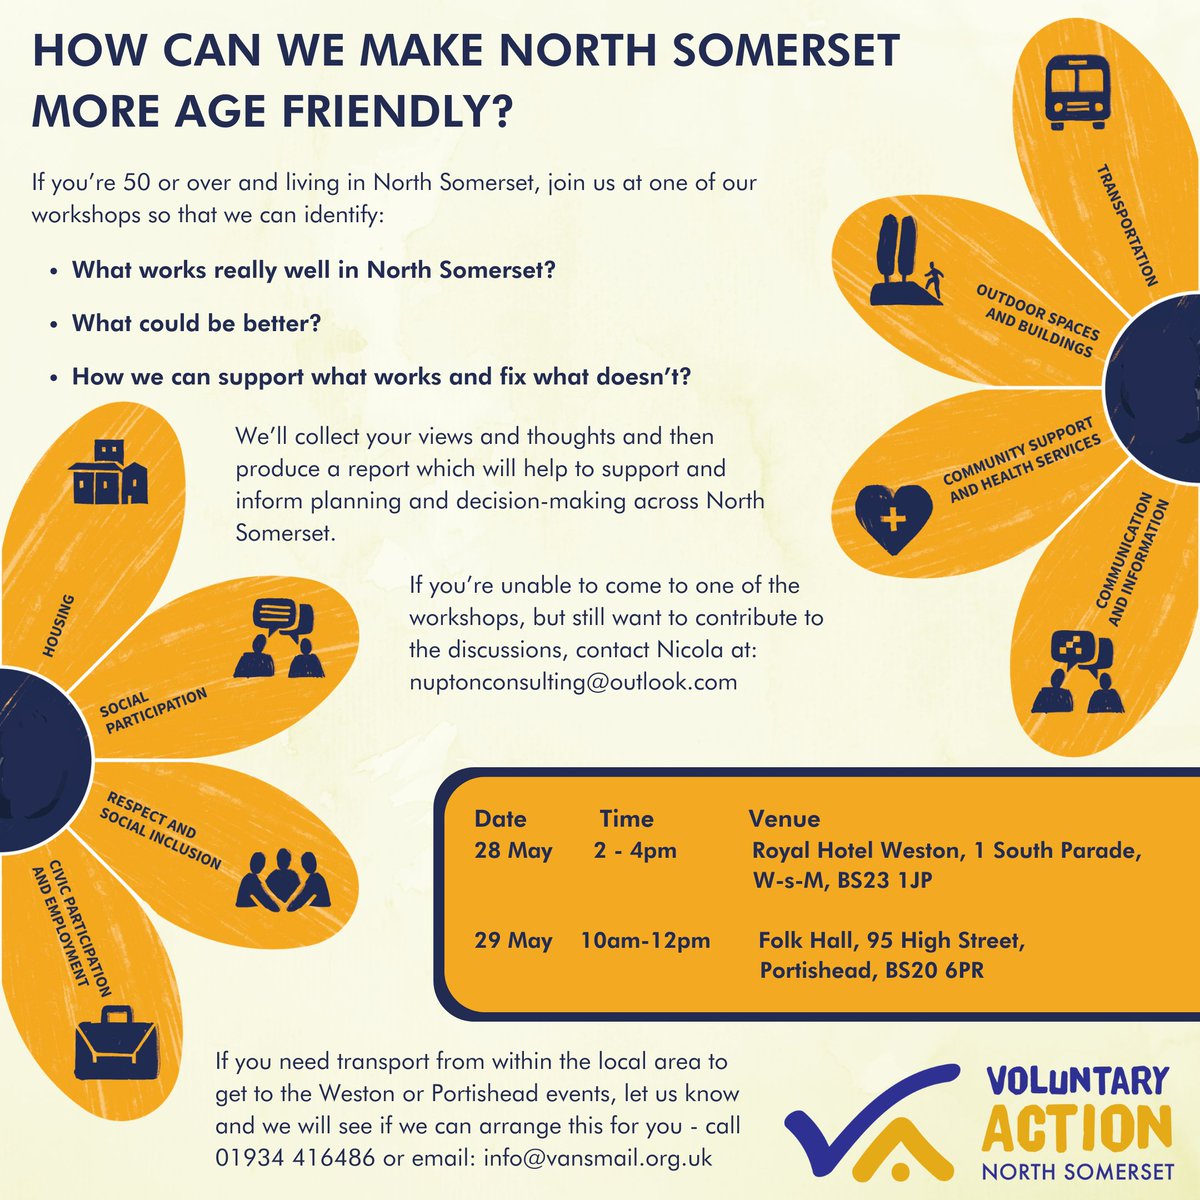 WE NEED YOUR INPUT! If you're 50+ and live in North Somerset join us at one of our workshops to discuss: HOW WE CAN MAKE NORTH SOMERSET MORE AGE-FRIENDLY? 28/5 (2-4pm): Royal Hotel, 1 South Parade, W-s-M, BS23 1JP 29/5 (10am-12pm): Folk Hall, 95 High Street, Portishead, BS20 6PR